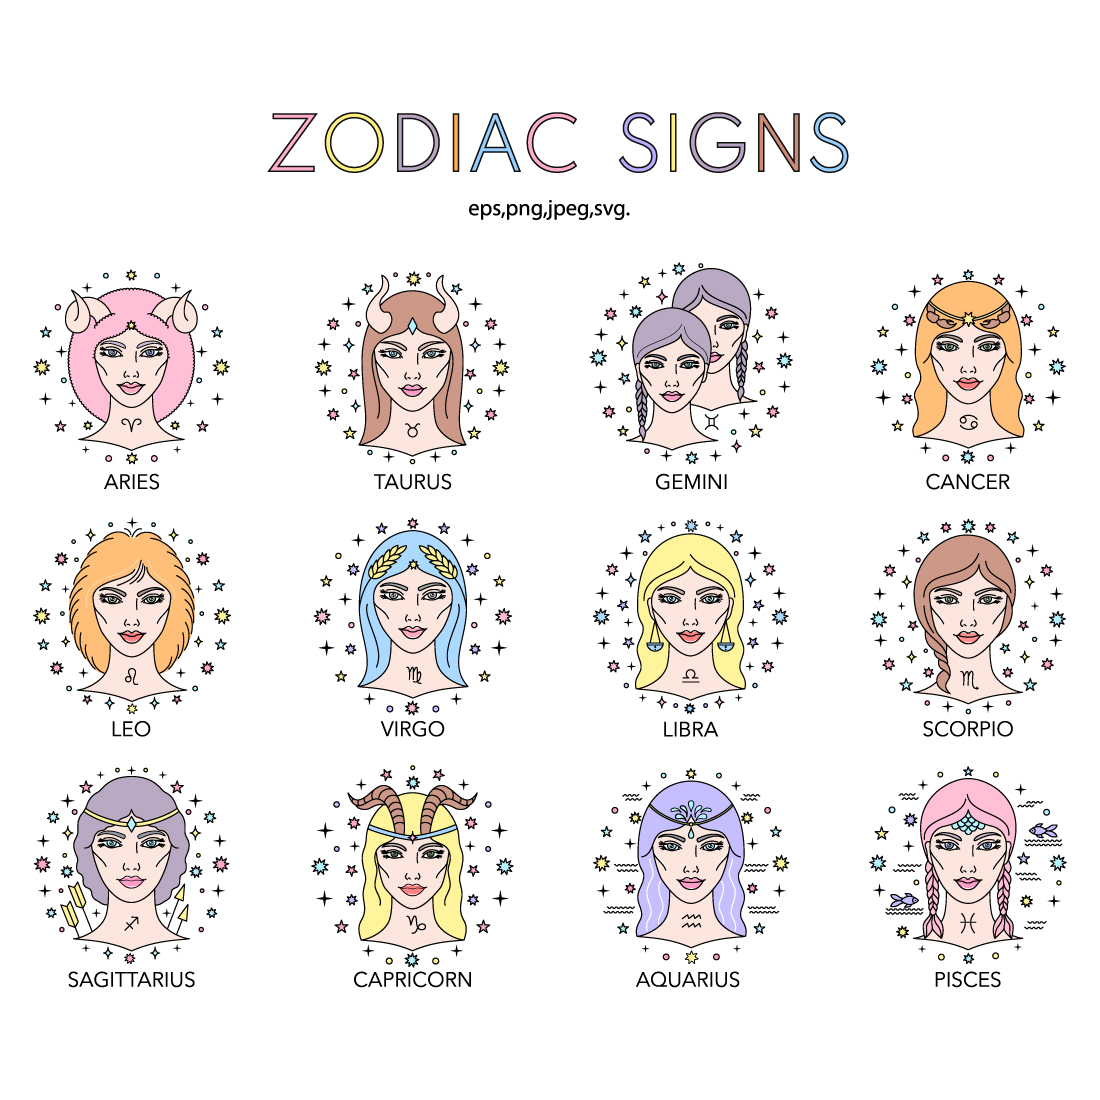 Zodiac signs cover image.